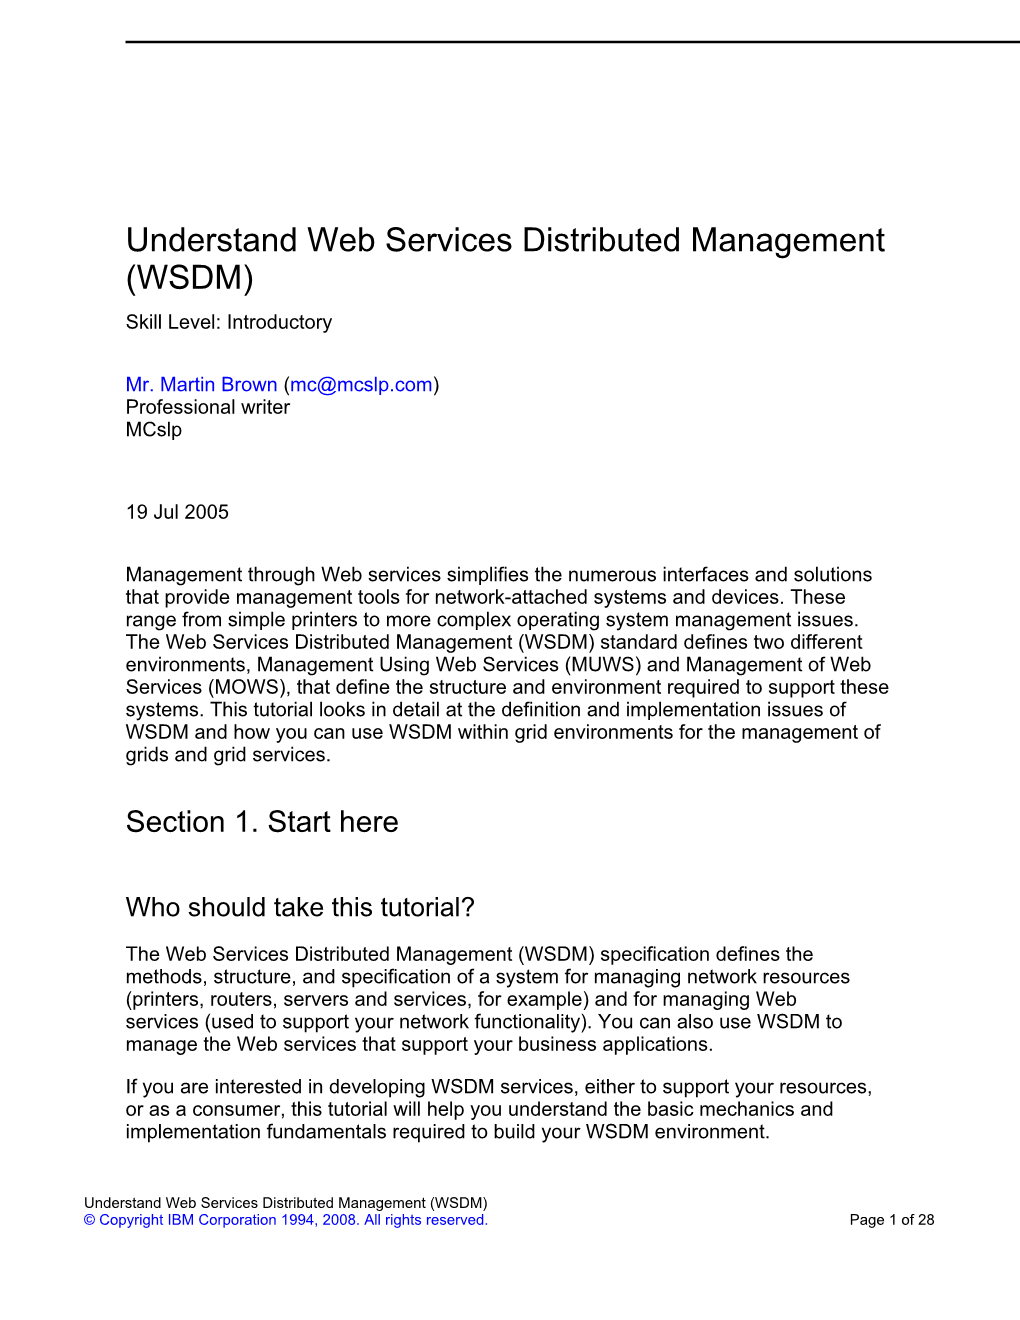 Understand Web Services Distributed Management (WSDM) Skill Level: Introductory